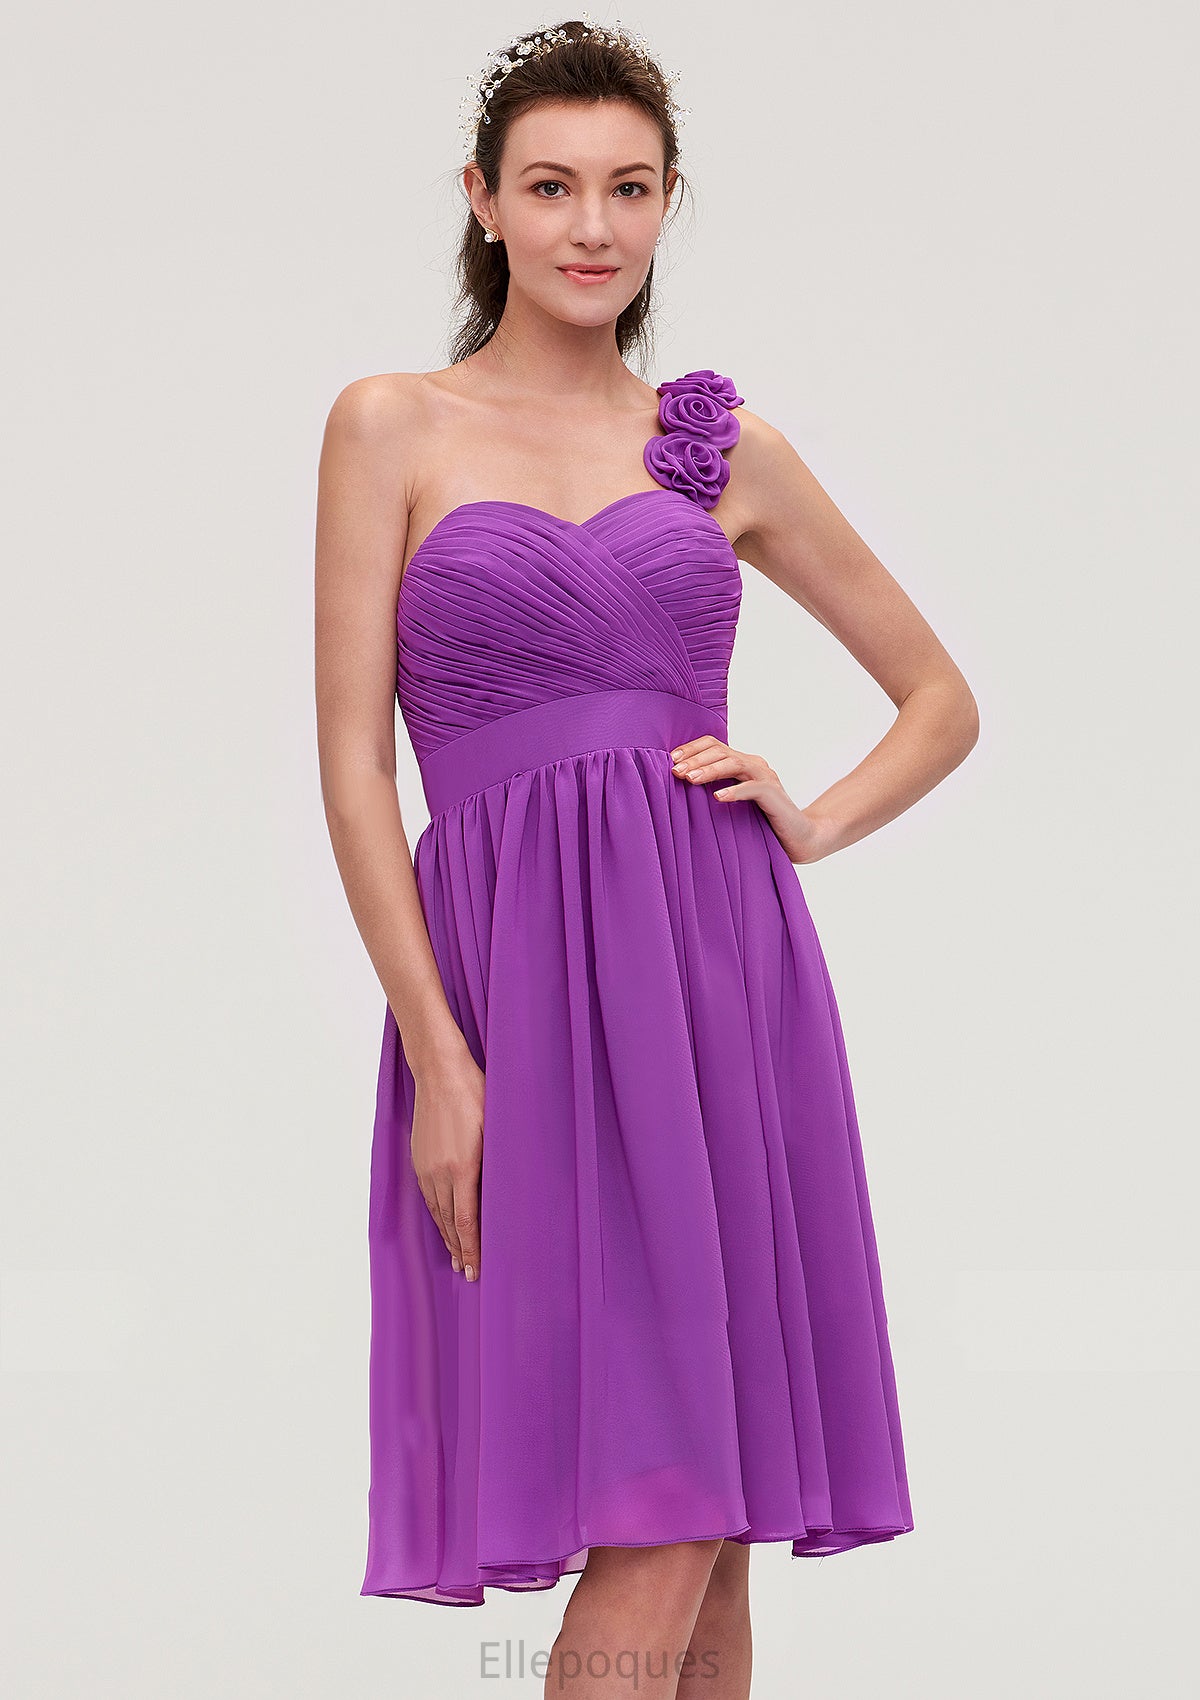 One-Shoulder Sleeveless Knee-Length Chiffon A-line/Princess Bridesmaid Dresseses With Pleated Flowers Kiersten HOP0025441